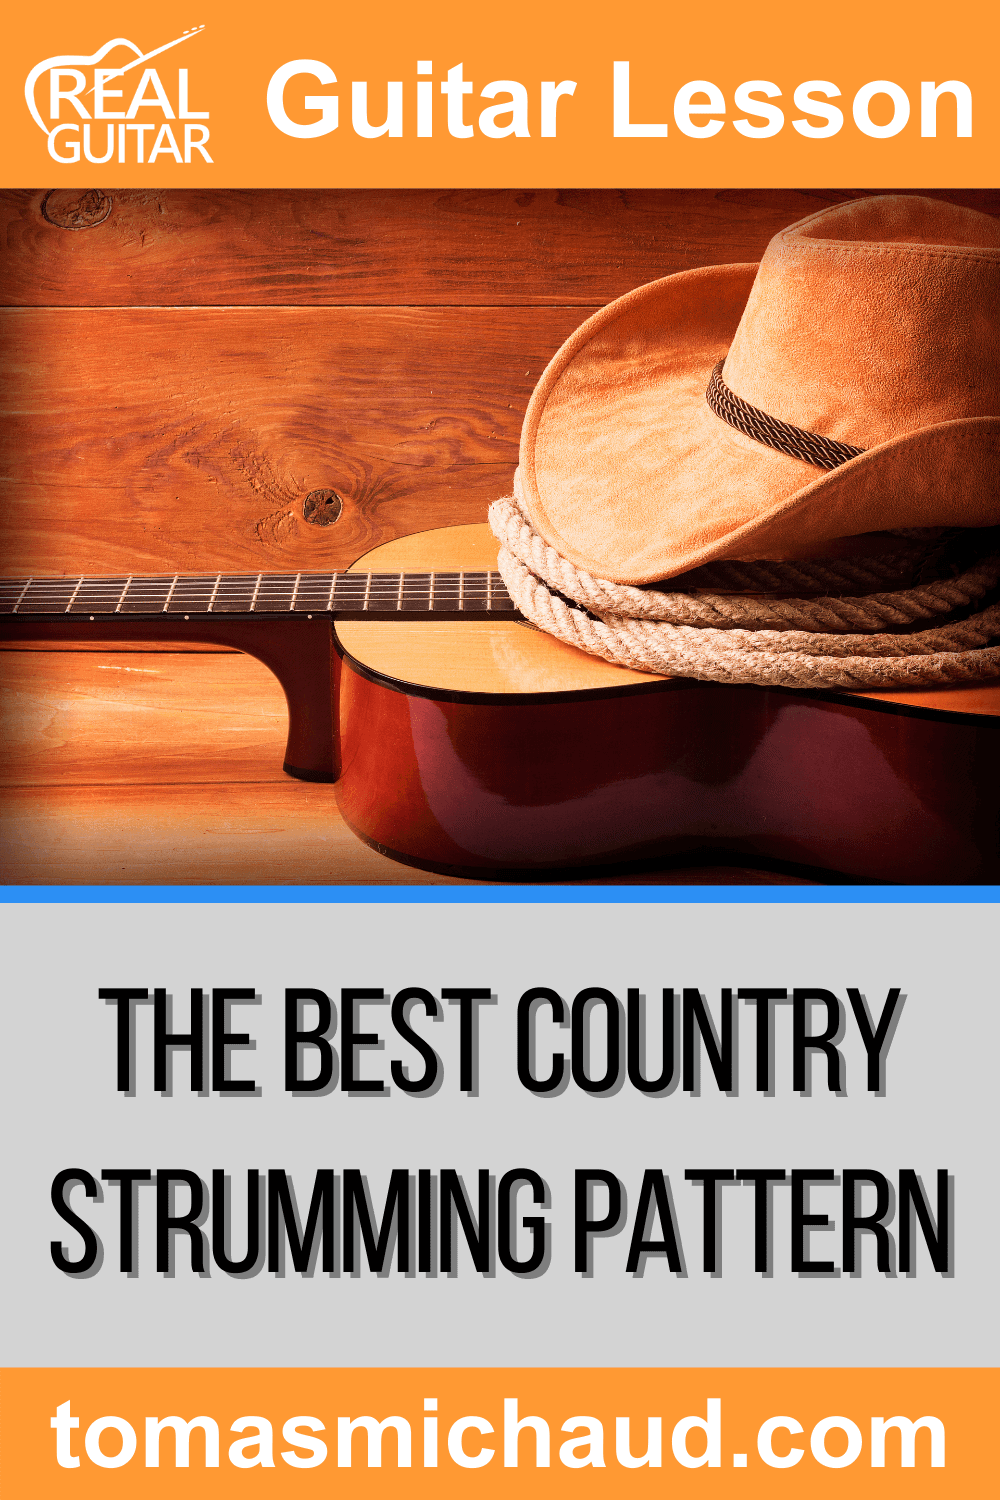 The Best Country Strumming Pattern